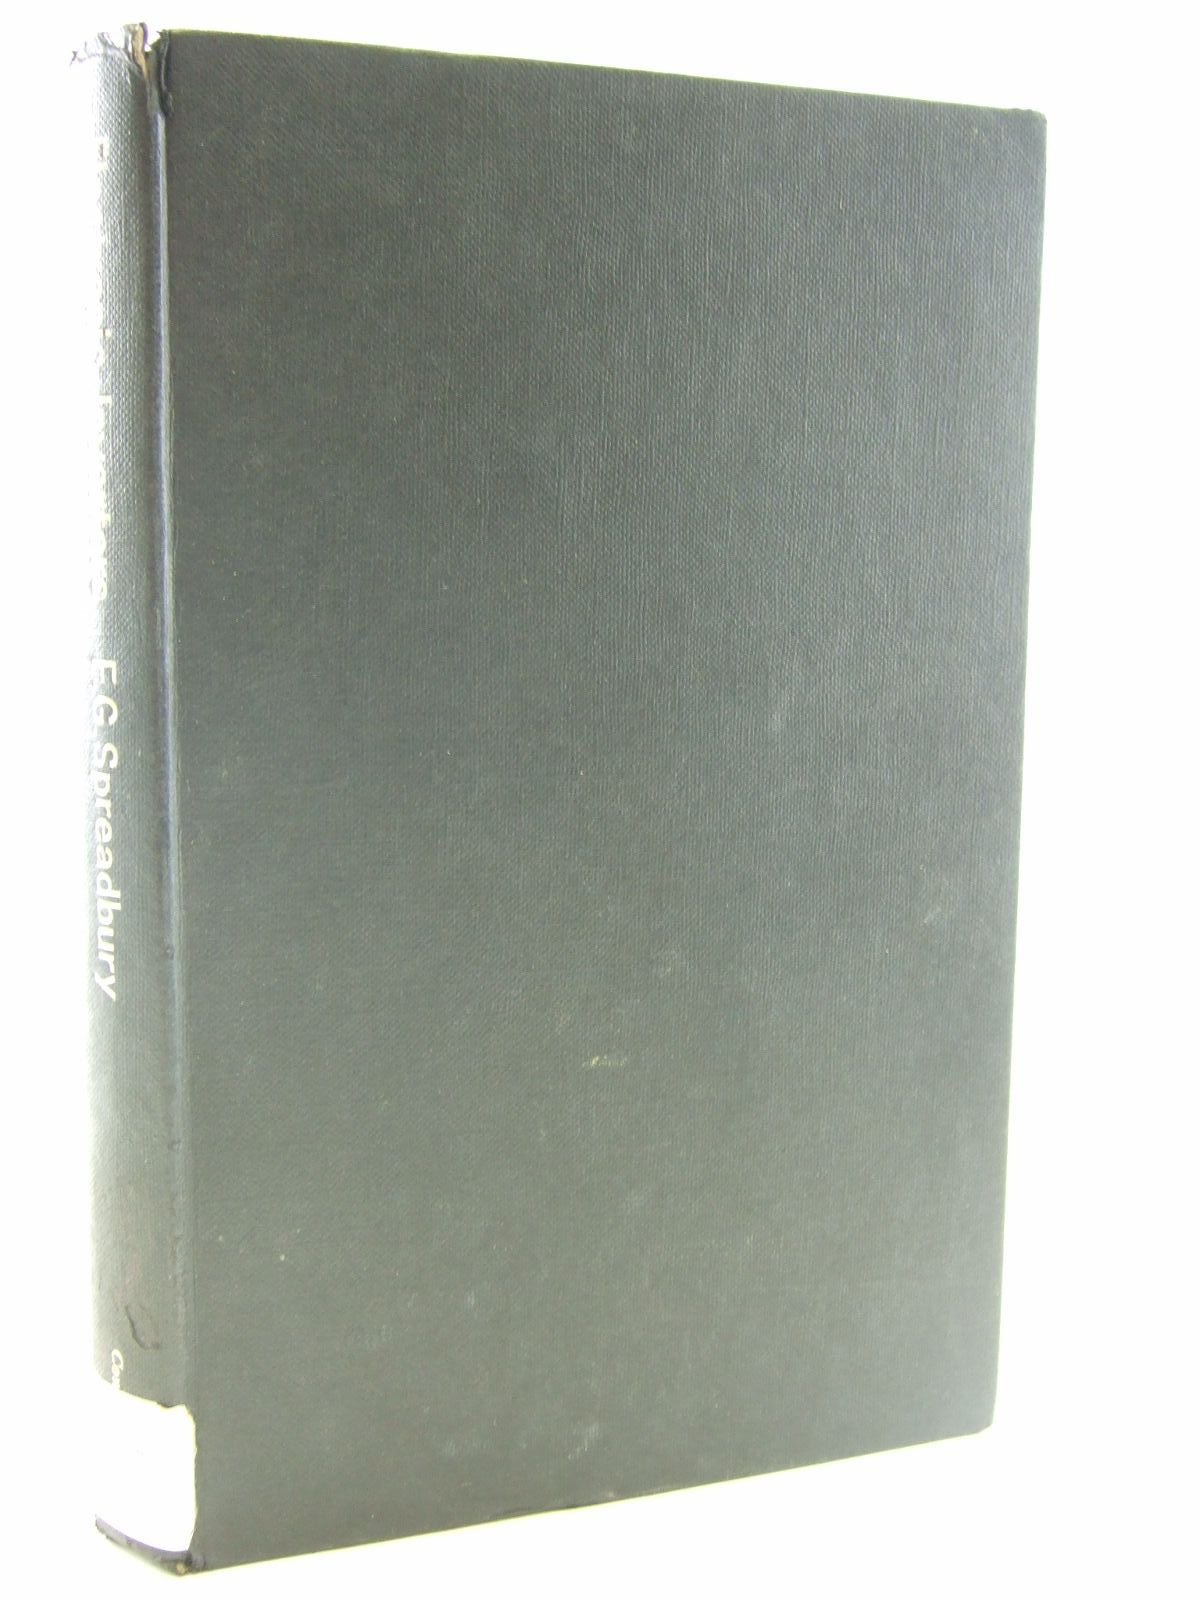 Photo of ELECTRONIC INVERTERS written by Spreadbury, F.G. published by Constable and Company Ltd. (STOCK CODE: 1206491)  for sale by Stella & Rose's Books